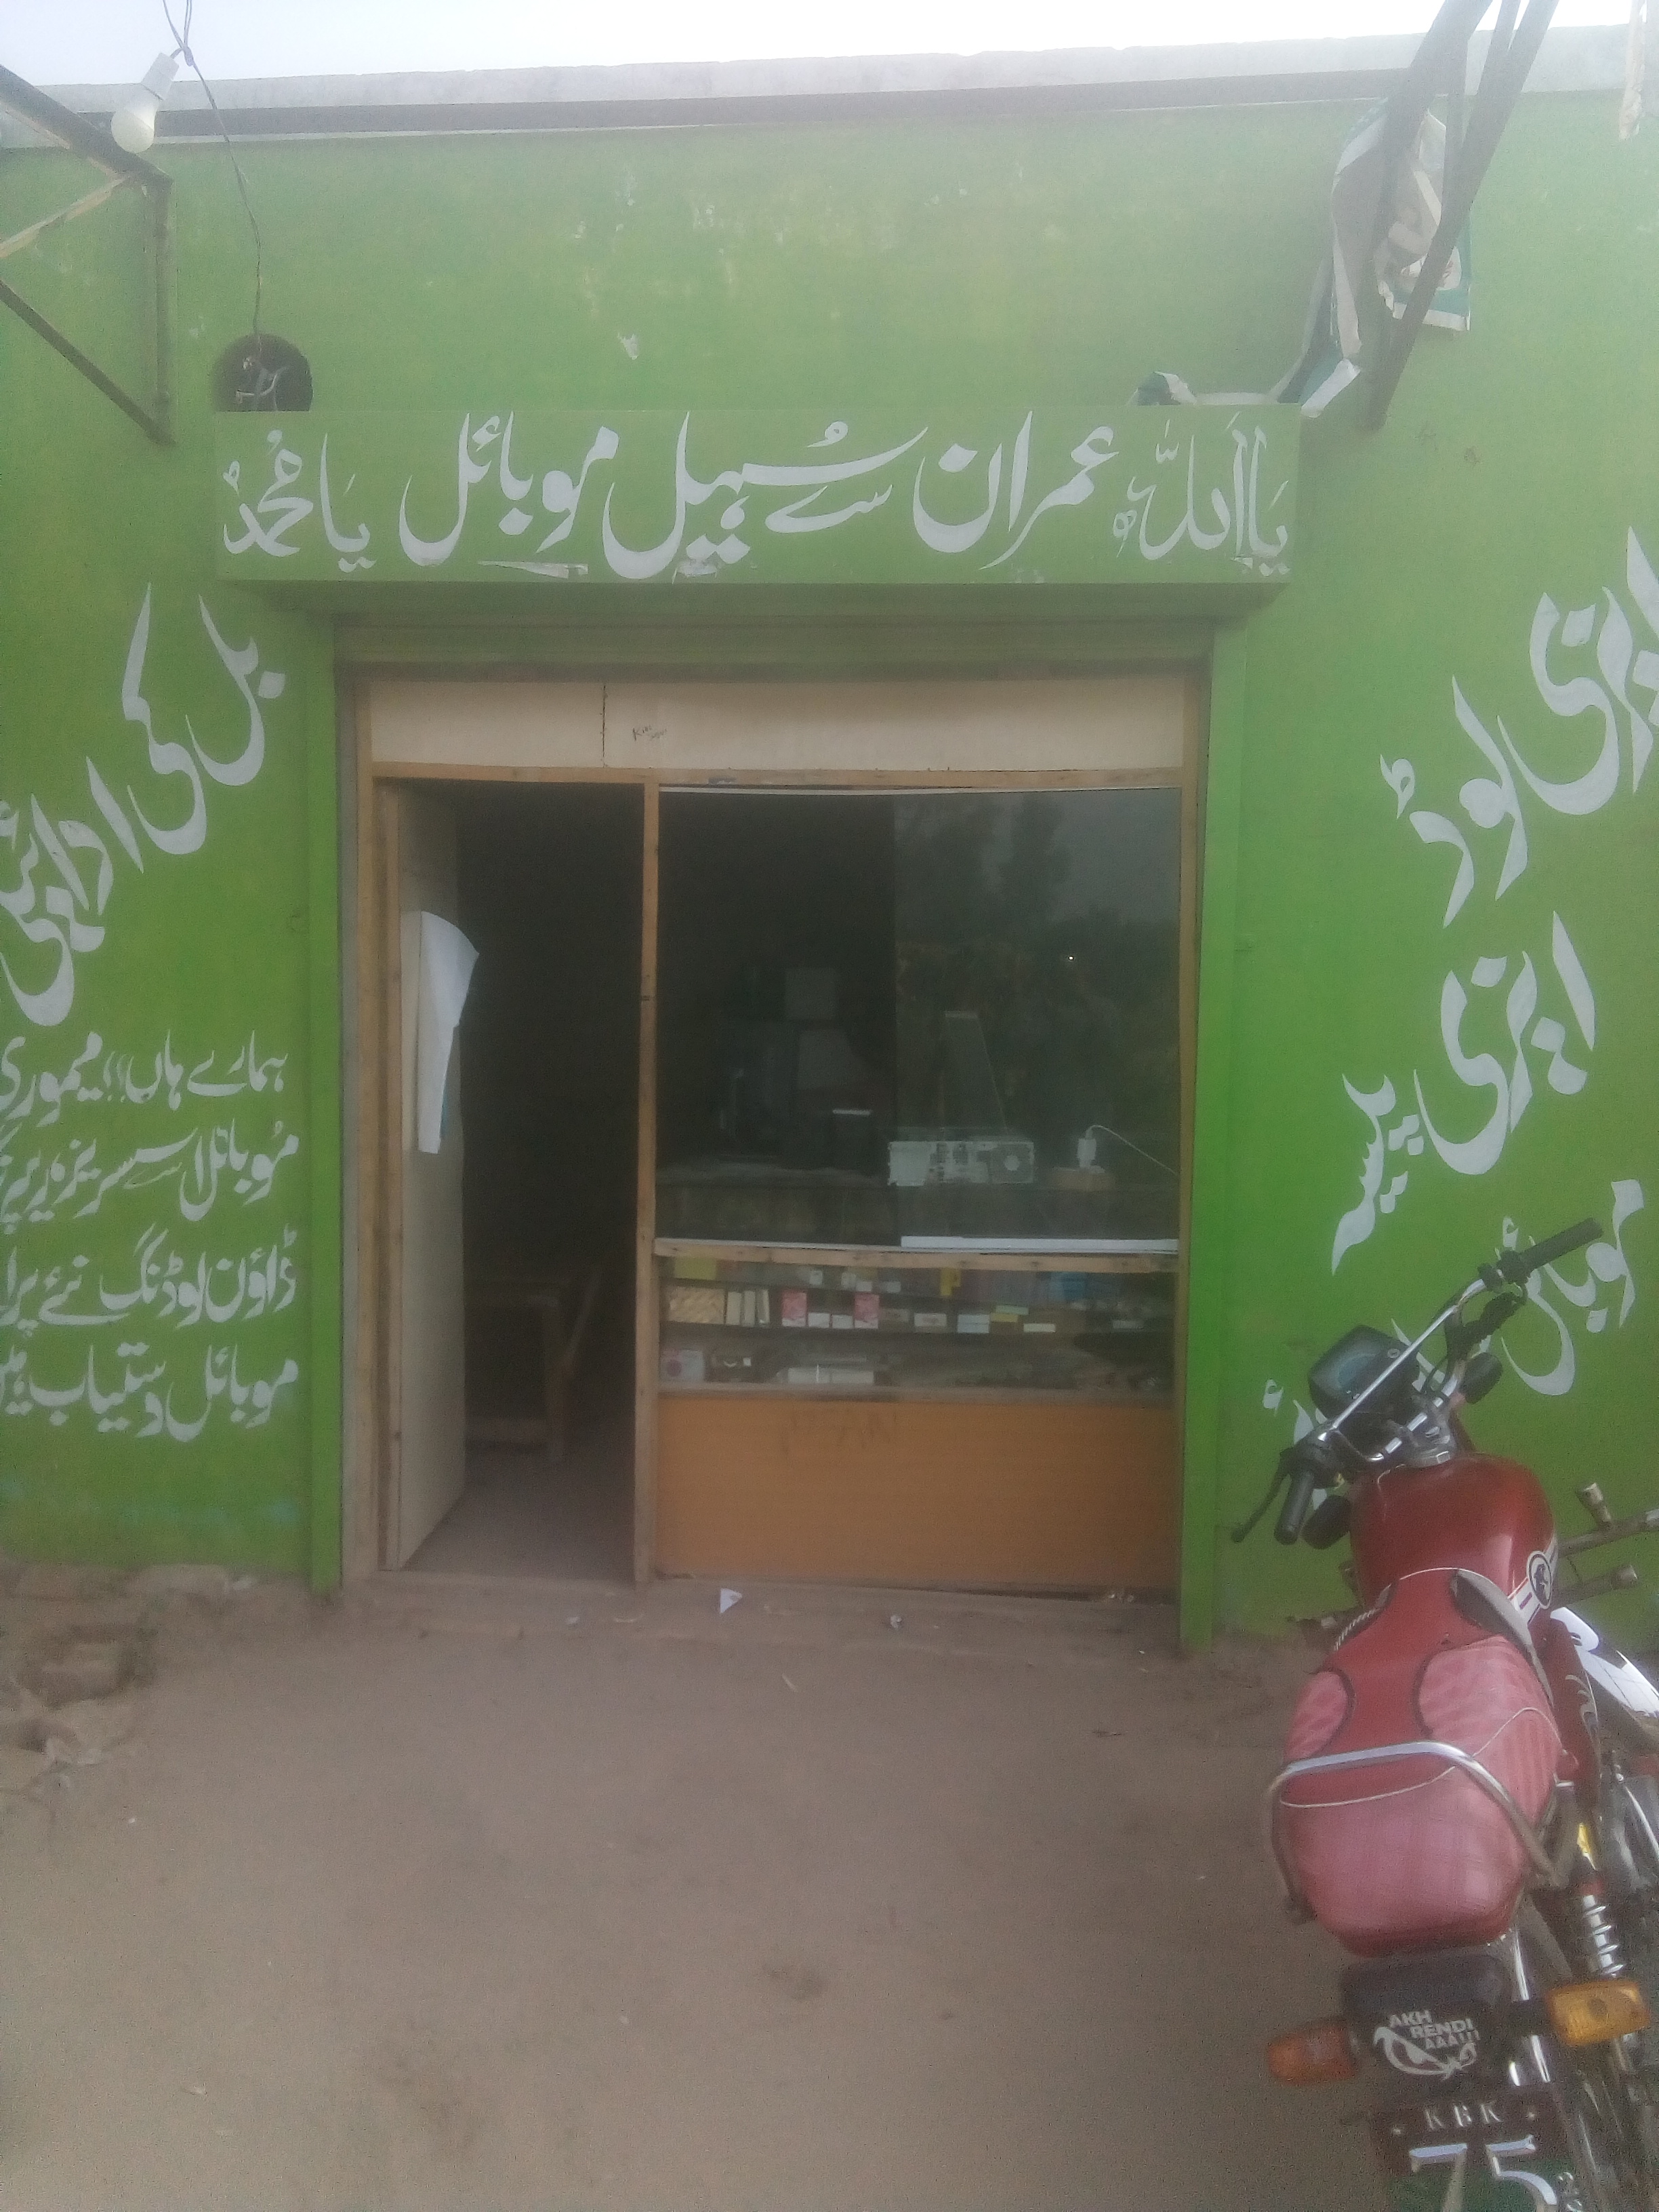 Imran Sohail Mobile and Computer shop cover